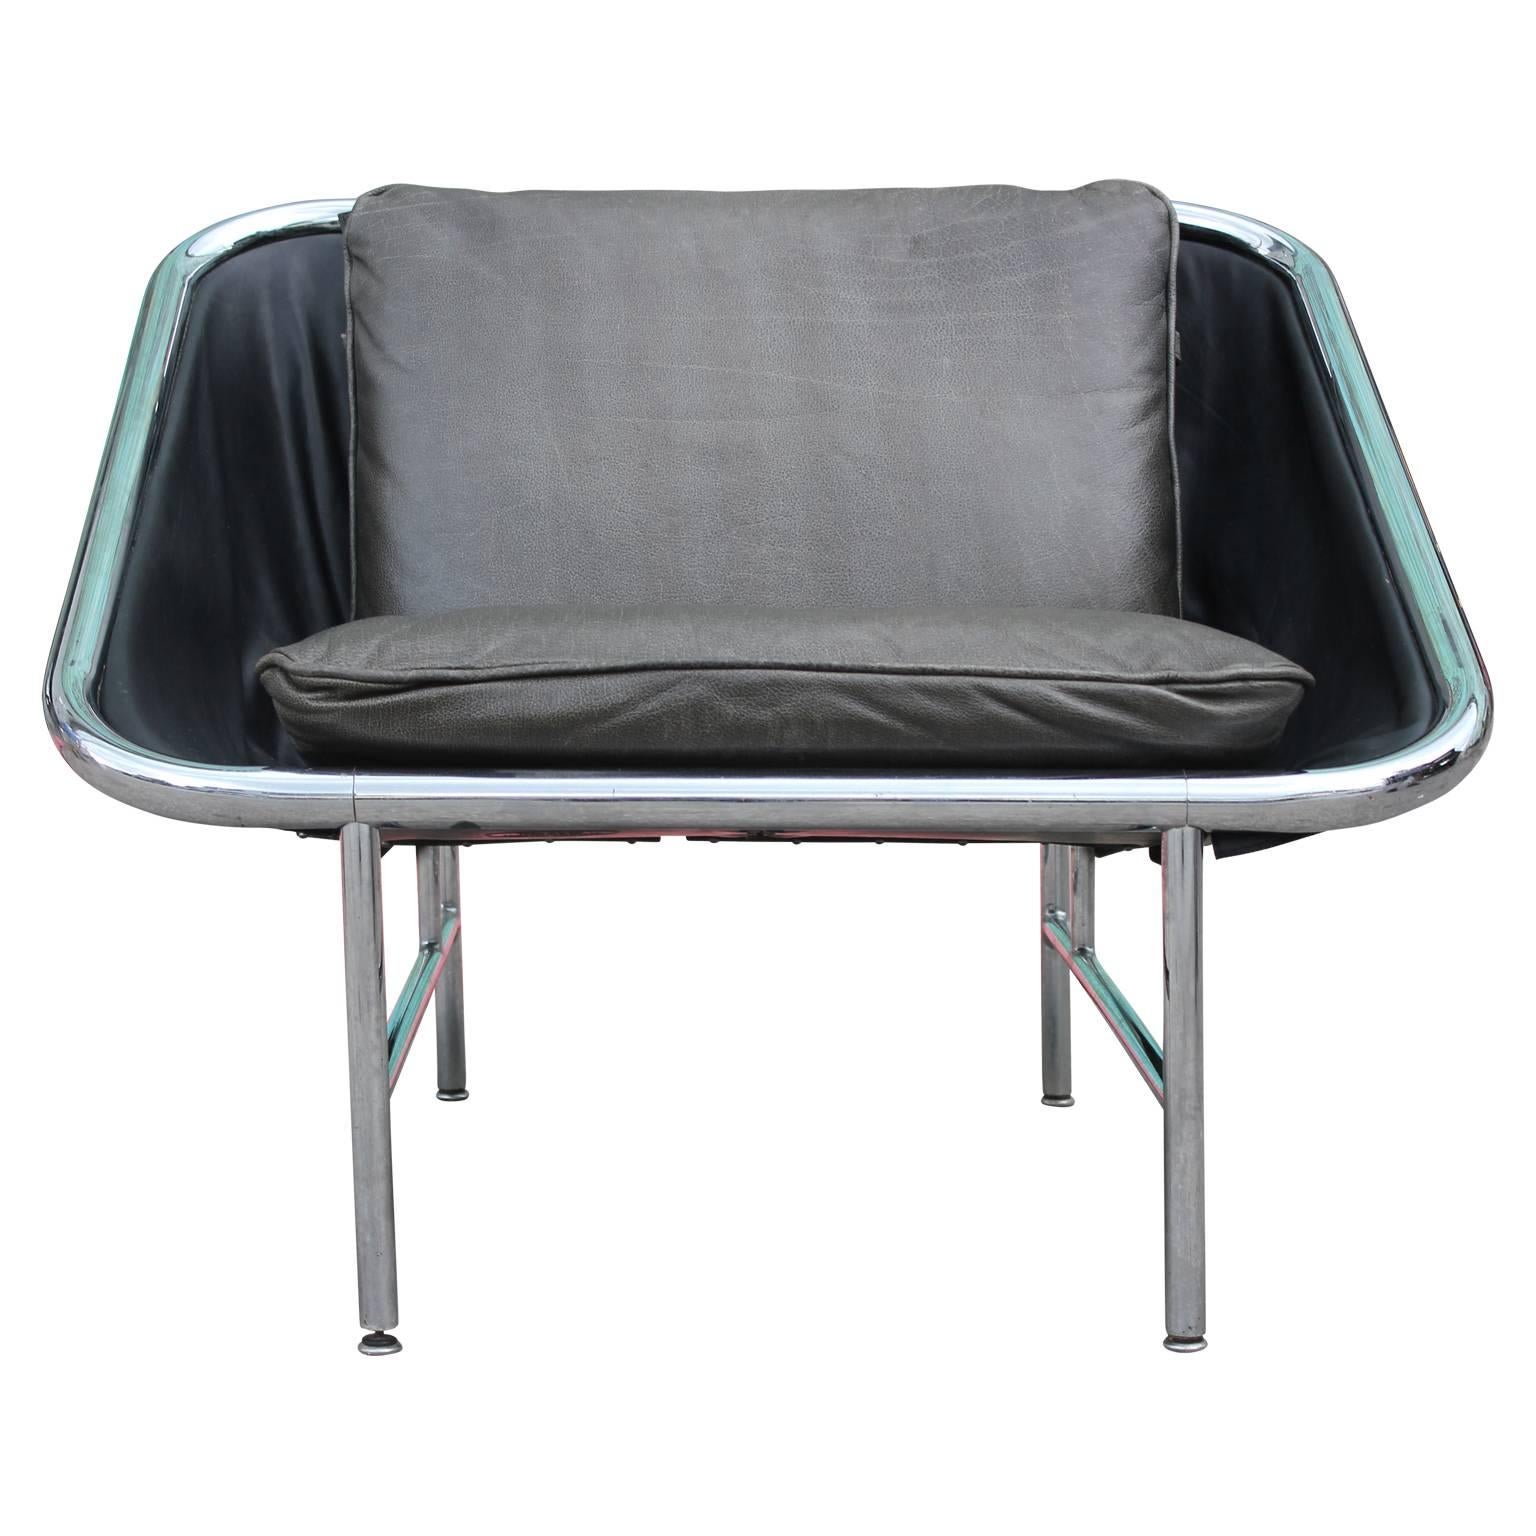 Unique George Nelson for Herman Miller chair made of chrome and custom made cushions in water buffalo leather. There are optional triangular arm pillows available, as seen in the last photo. Extremely sleek and a perfect addition to any room!